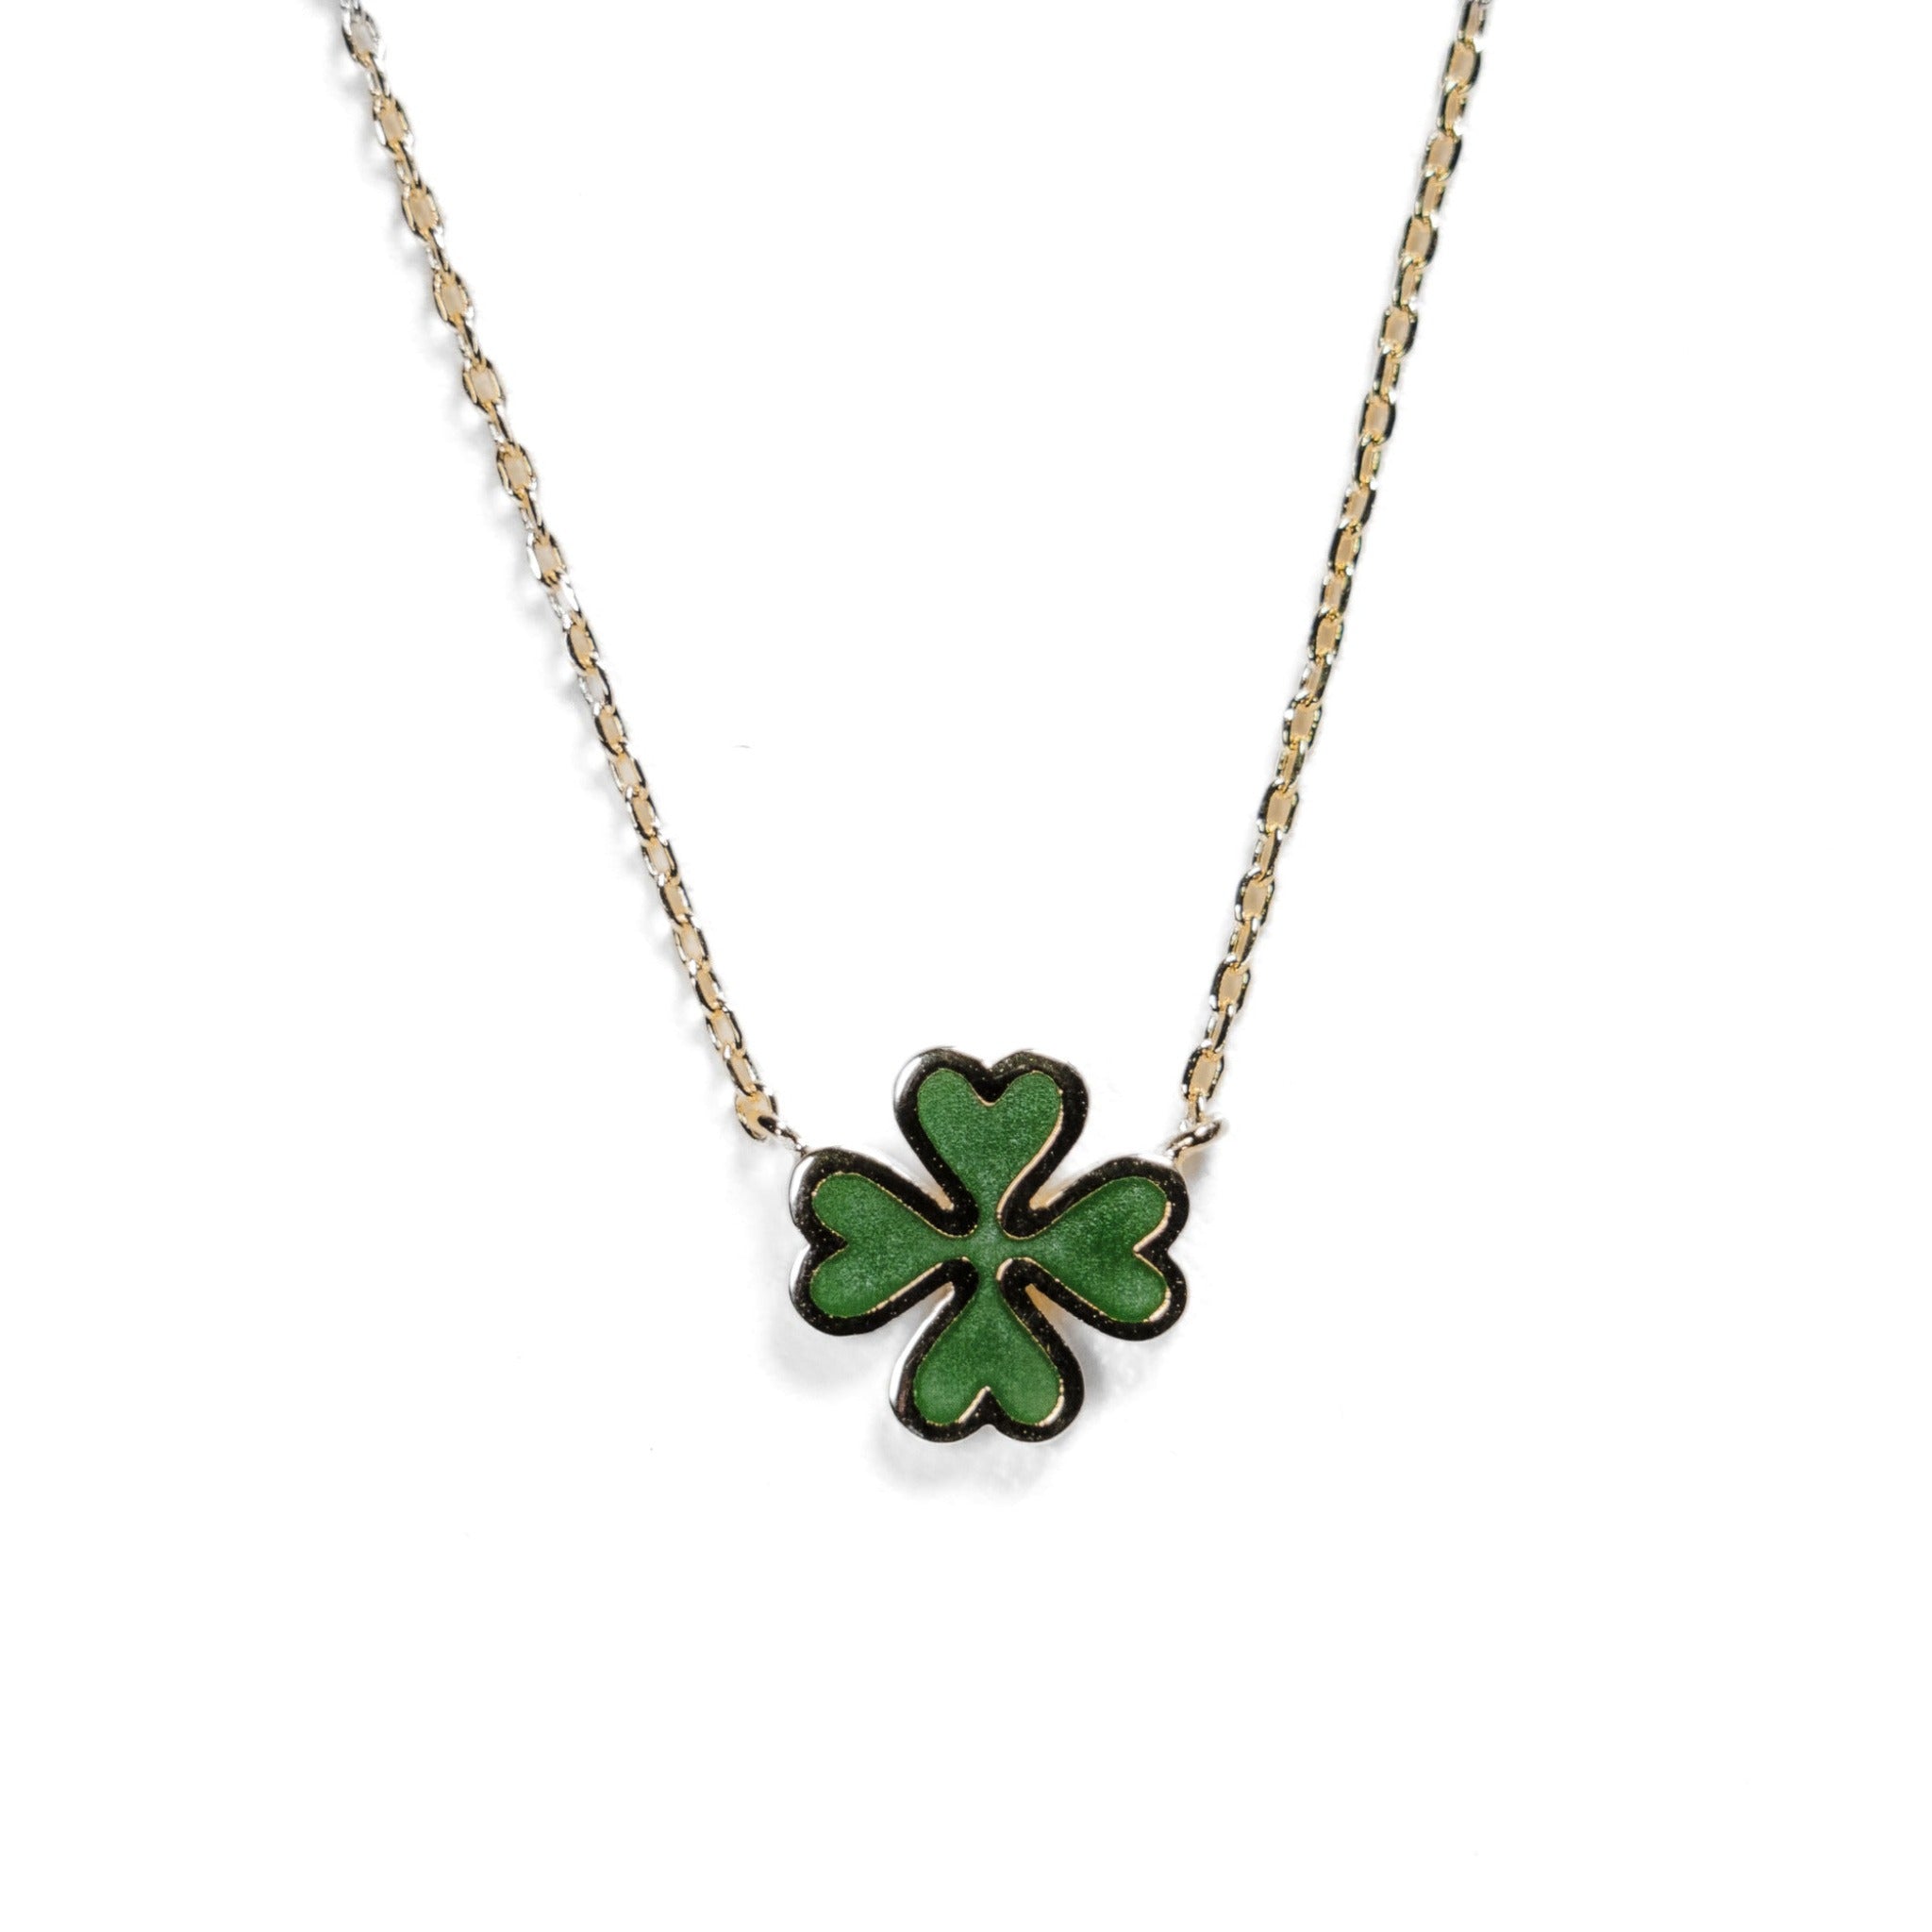 Envy Long Gold Necklace with Black and White Clover Detail - La Maison